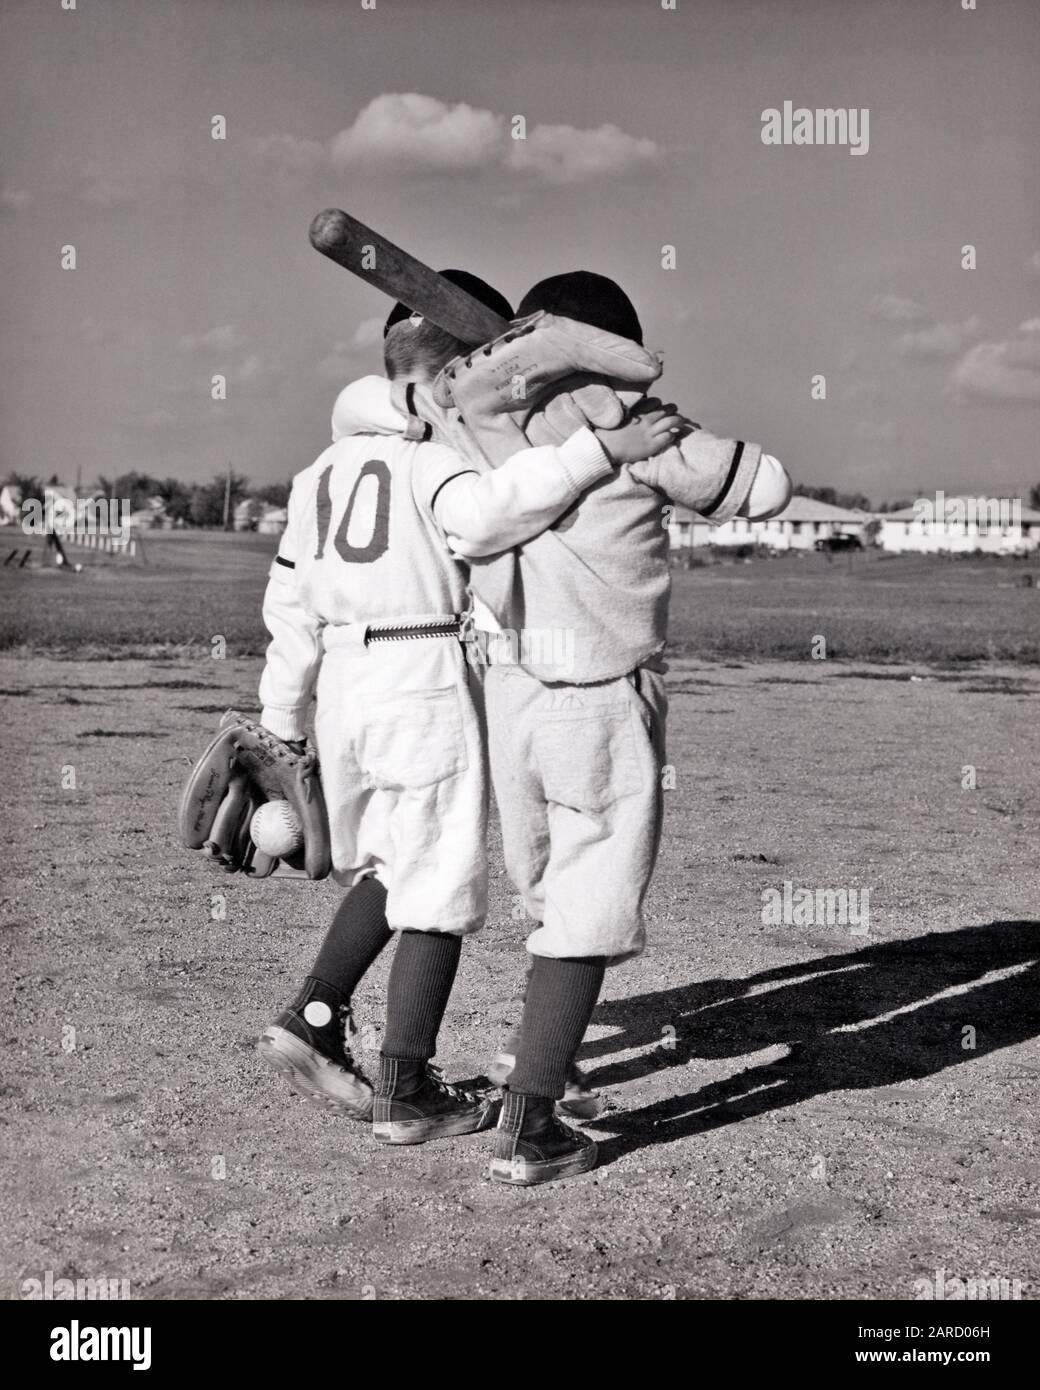 1960s BACK VIEW TWO BOYS ARM IN ARM BACK VIEW WEARING LITTLE LEAGUE BASEBALL UNIFORMS - b14309 HAR001 HARS JOY LIFESTYLE BROTHERS HEALTHINESS ATHLETICS COPY SPACE FRIENDSHIP FULL-LENGTH INSPIRATION CARING MALES ATHLETIC SNEAKERS B&W ACTIVITY HAPPINESS PHYSICAL STRENGTH PALS ARM IN ARM RECREATION REAR VIEW UNIFORMS CONNECTION CONCEPTUAL ATHLETES FLEXIBILITY FRIENDLY MUSCLES SUPPORT BEST FRIEND BACK VIEW BALL GAME BALL SPORT COOPERATION GROWTH JUVENILES RELAXATION TOGETHERNESS WALKING AWAY BASEBALL BAT BEST FRIENDS BFF BLACK AND WHITE CAUCASIAN ETHNICITY HAR001 OLD FASHIONED Stock Photo